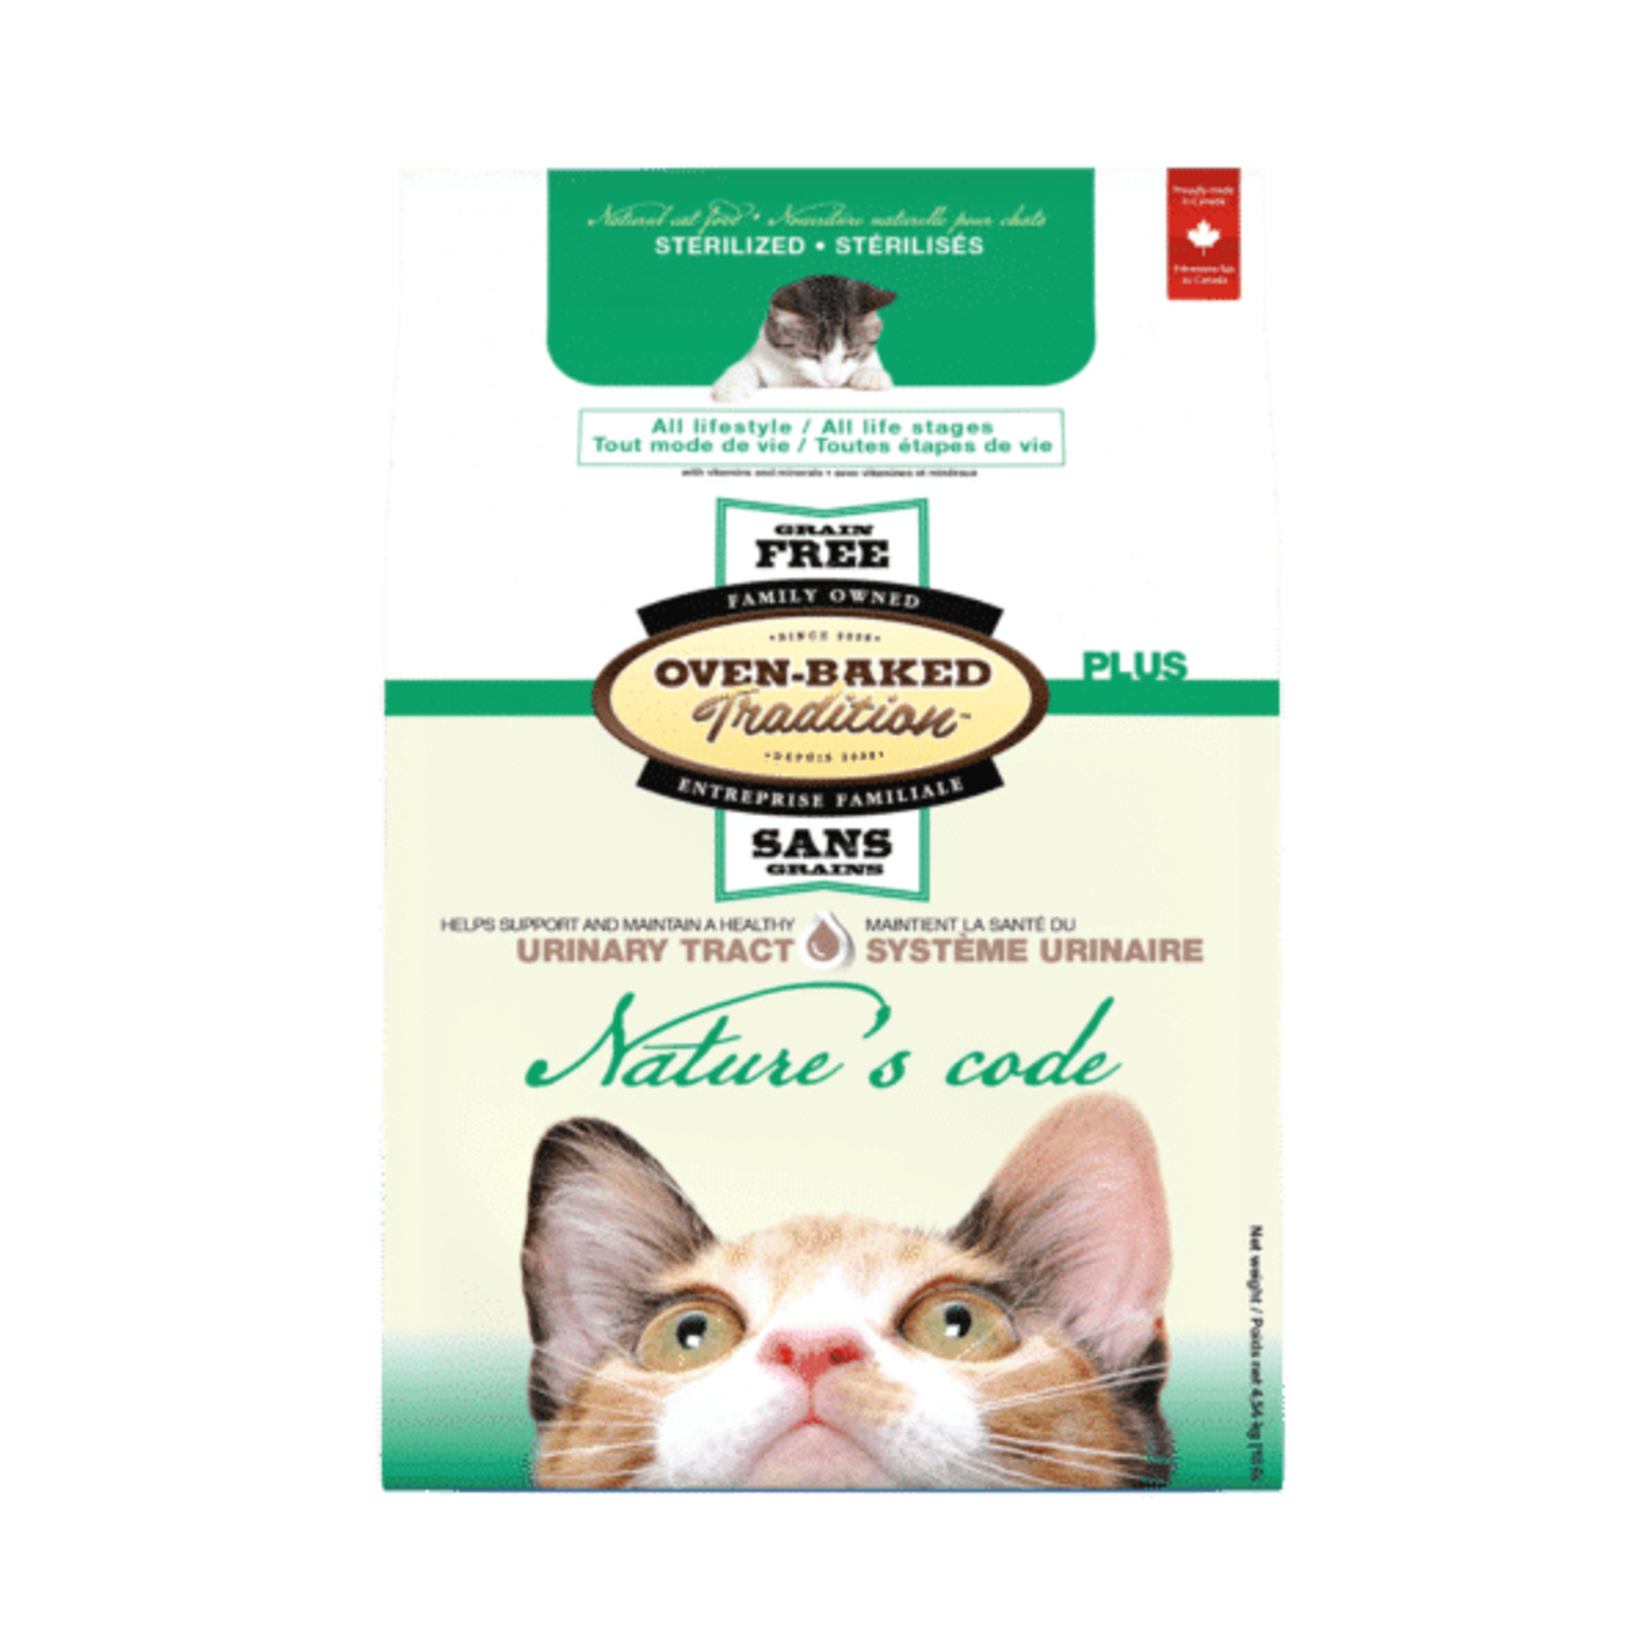 OVEN-BAKED OVEN BAKED NATURES CODE CHAT POUR SOINS URINAIRE 2.27 KG